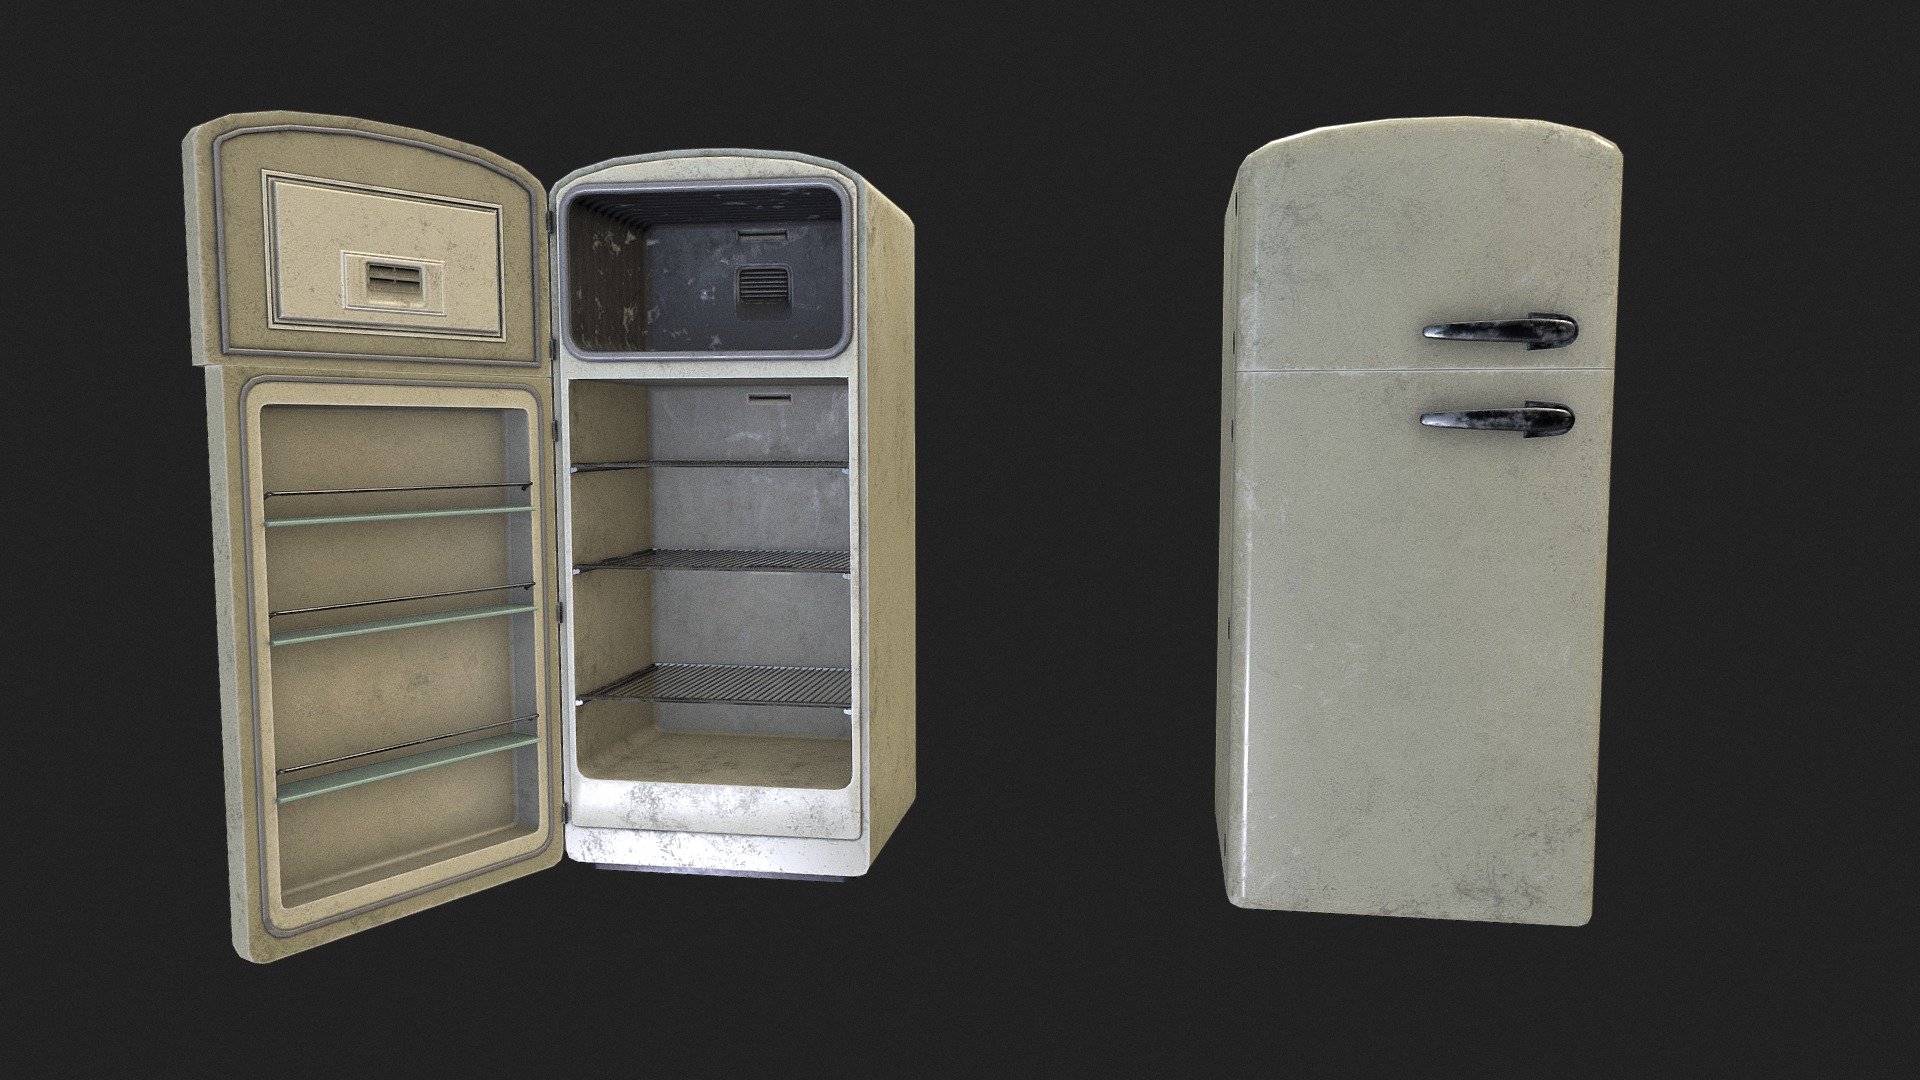 2048x2048 textures packs (PBR Metal Rough, Unity HDRP, Unity Standard Metallic and UE4):

PBR Metal Rough- BaseColor, AO, Height, Normal, Roughness, Metallic and Emissive;

Unity HDRP: BaseColor, MaskMap, Normal and Emissive;

Unity Standard Metallic: AlbedoTransparency, MetallicSmoothness, Normal and Emissive;

Unreal Engine 4: BaseColor, Normal, OcclusionRoughnessMetallic and Emissive;

The package also has the .fbx, .obj, .dae and .blend file - Old Fridge - Buy Royalty Free 3D model by Thiago Ferraro (@thiagoferraro) 3d model